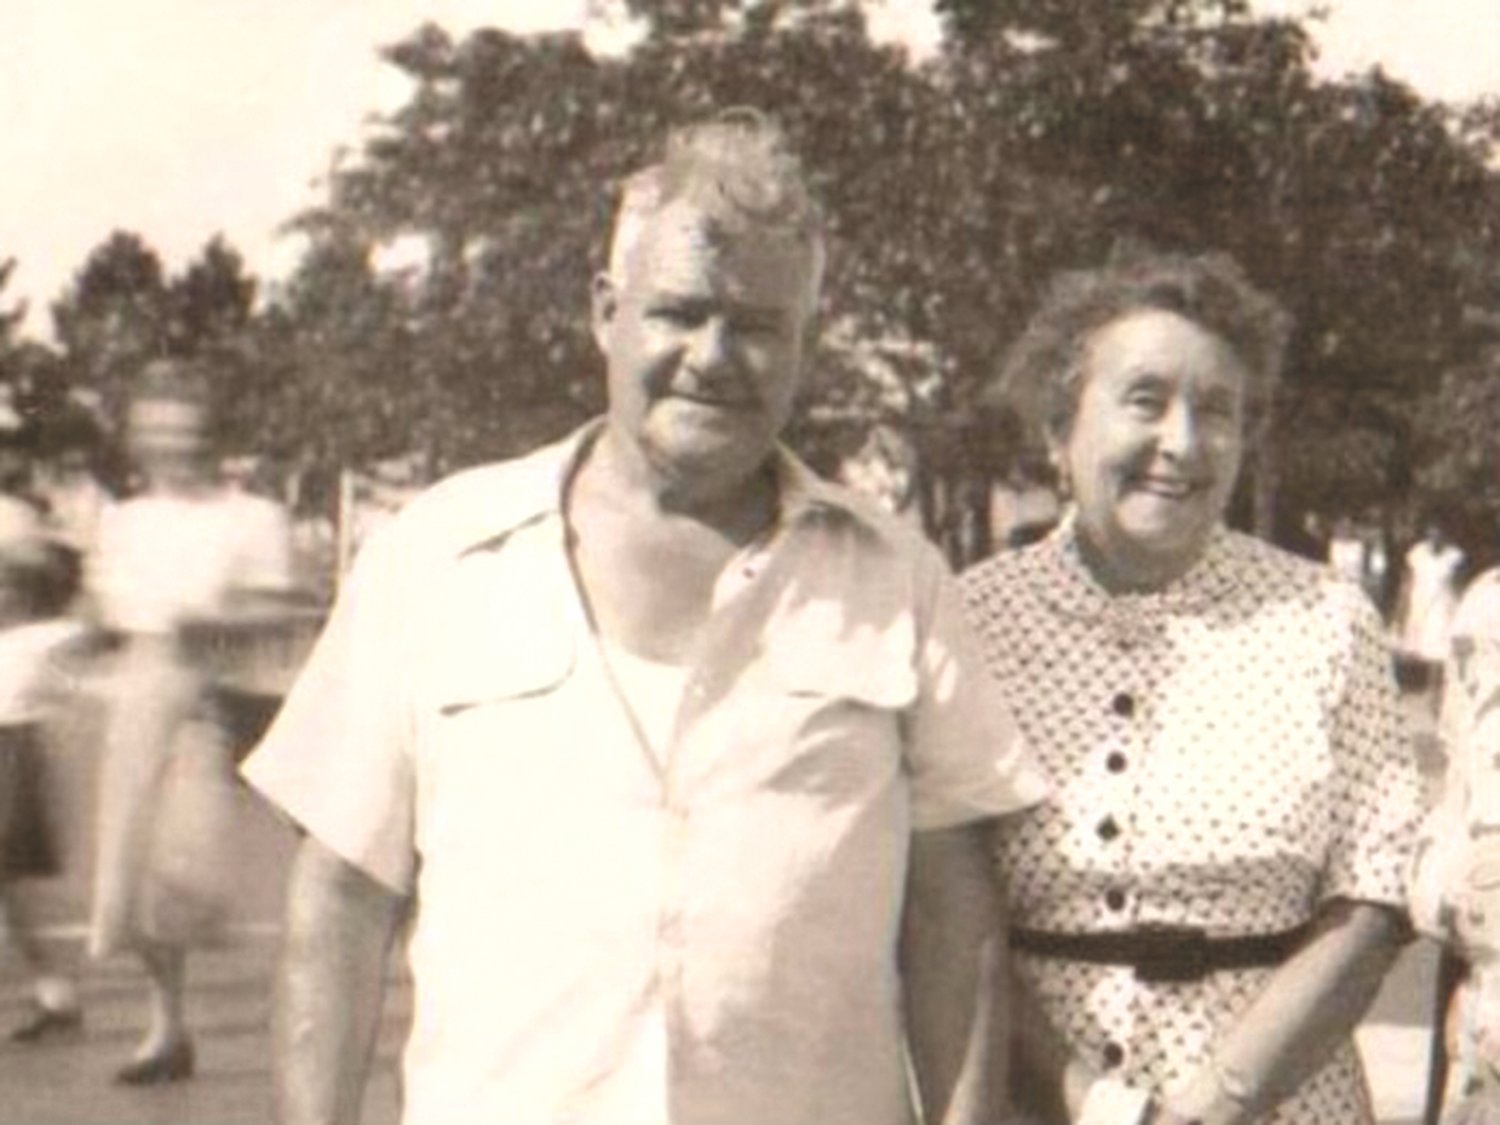 ORIGINAL OWNERS: Clement Wood and his wife, Margaret, were the original owners of Stadium Fish and Chips (which was previously named Auburn Fish and Chips).